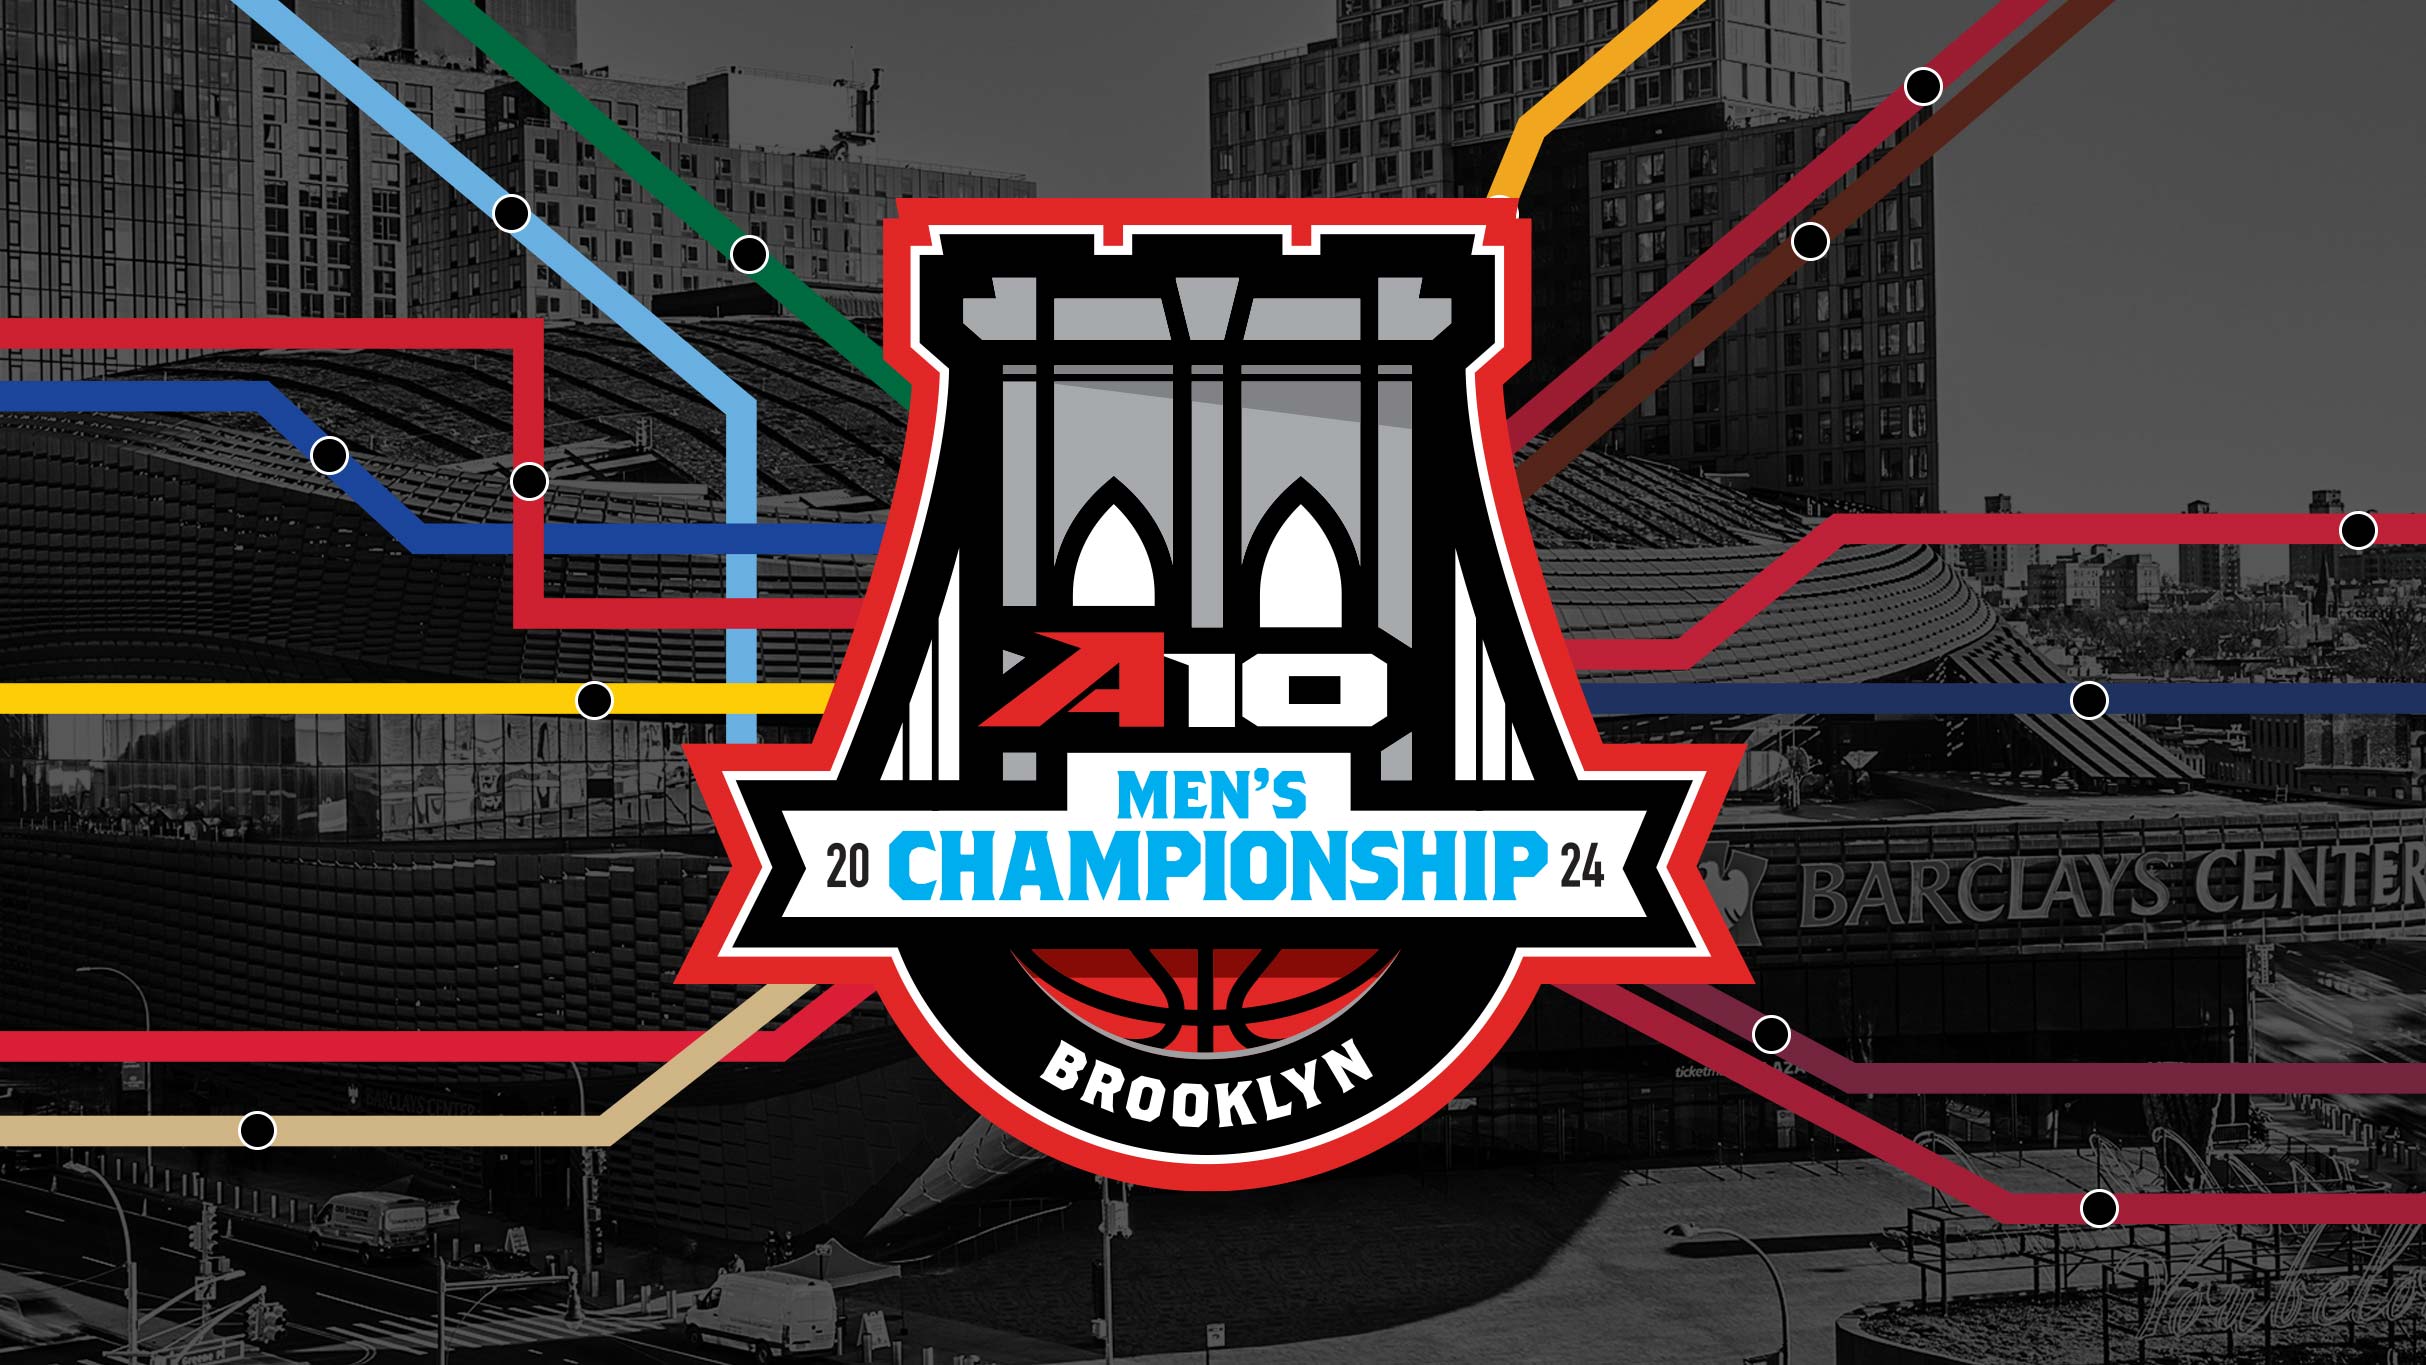 Atlantic 10 Men's Basketball Championship - Session 2 in Brooklyn promo photo for American Express® Early Access presale offer code